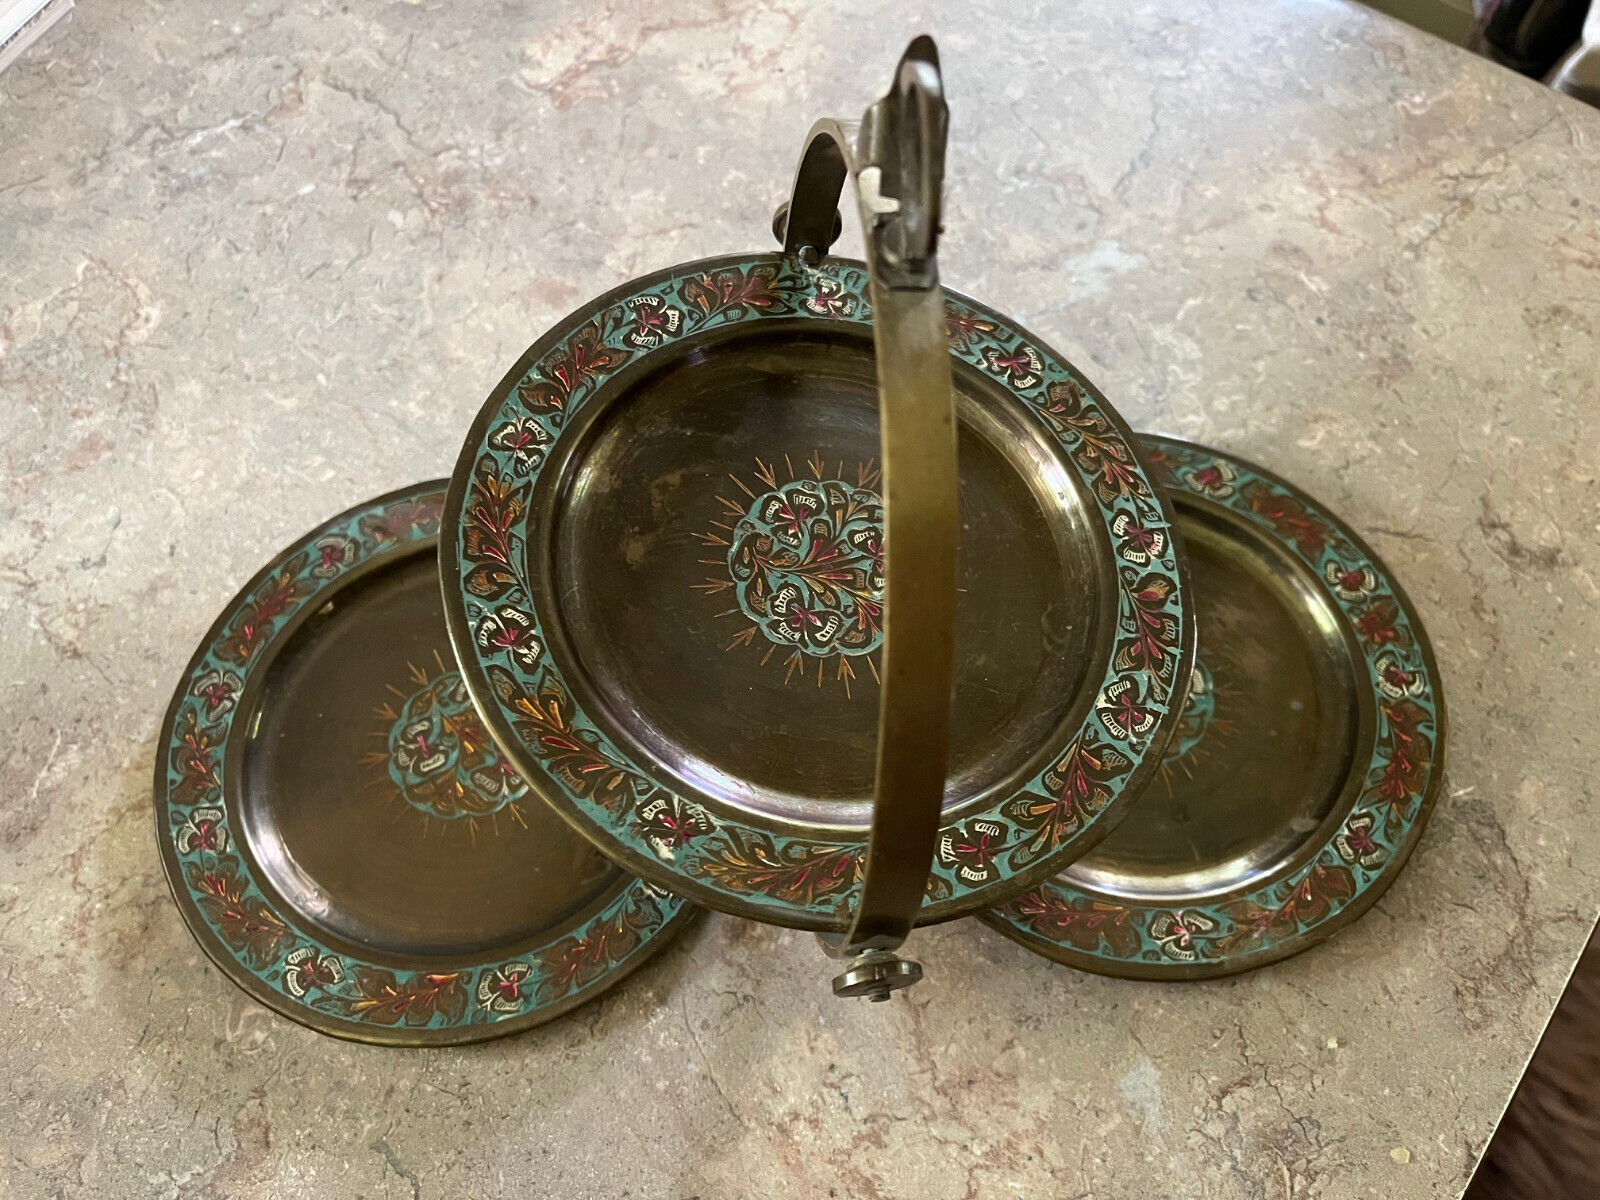 Vintage INDIA 3 tier collapsible serving tray - Enamel, Brass 1940's